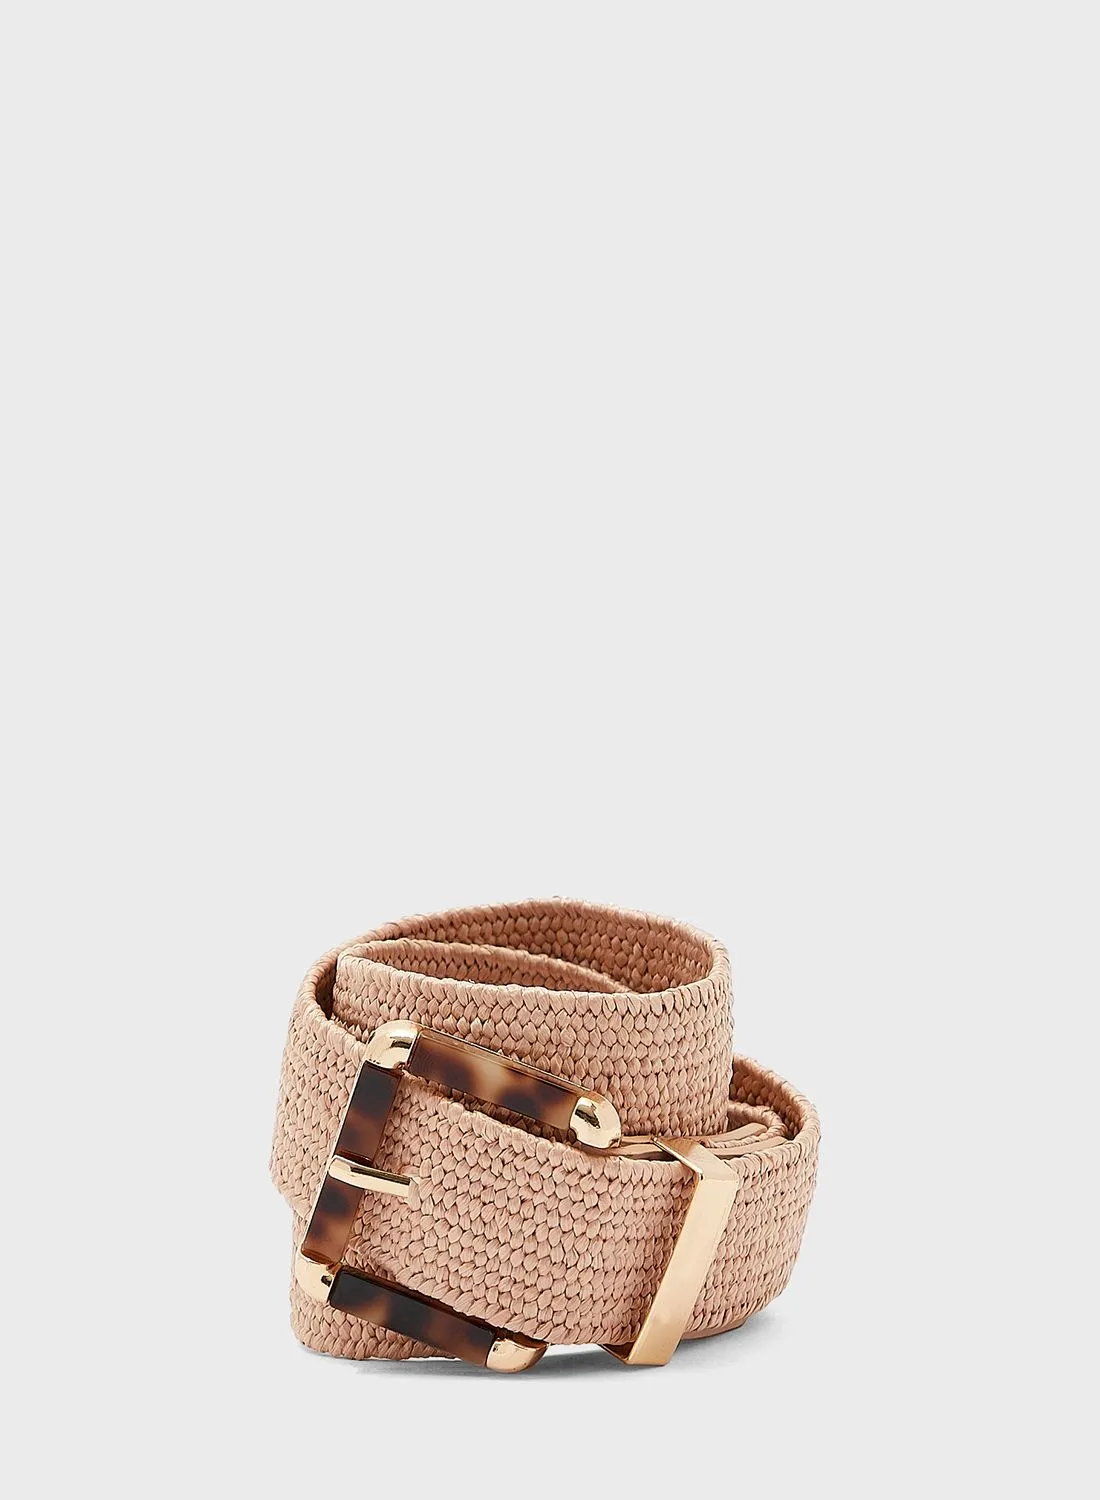 NEW LOOK Casual Allocated Hole Belt